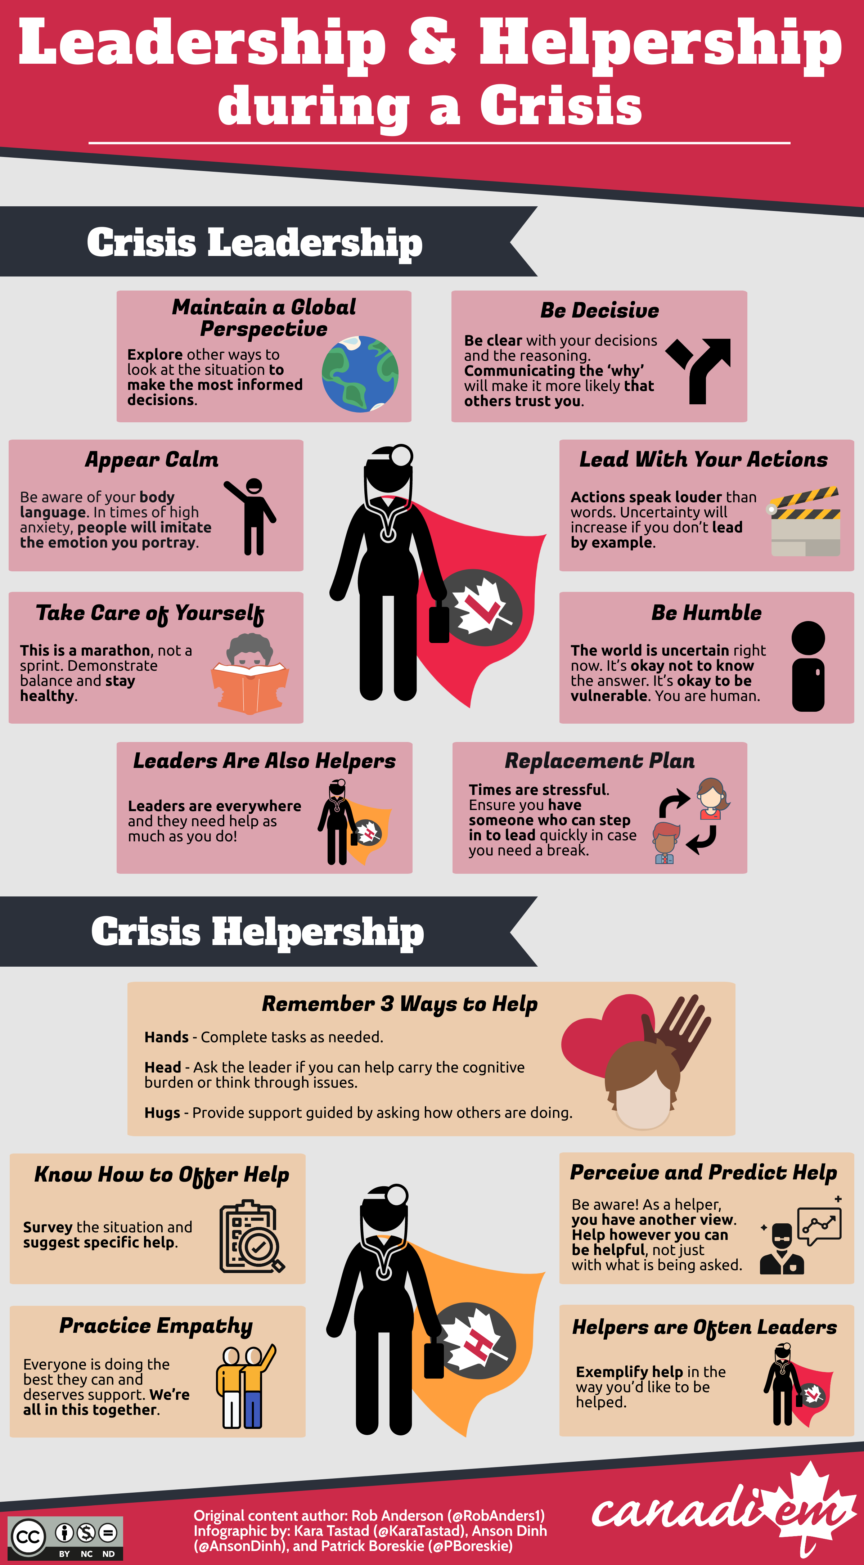 Are You A Boss, A Leader Or Both? - Infographic